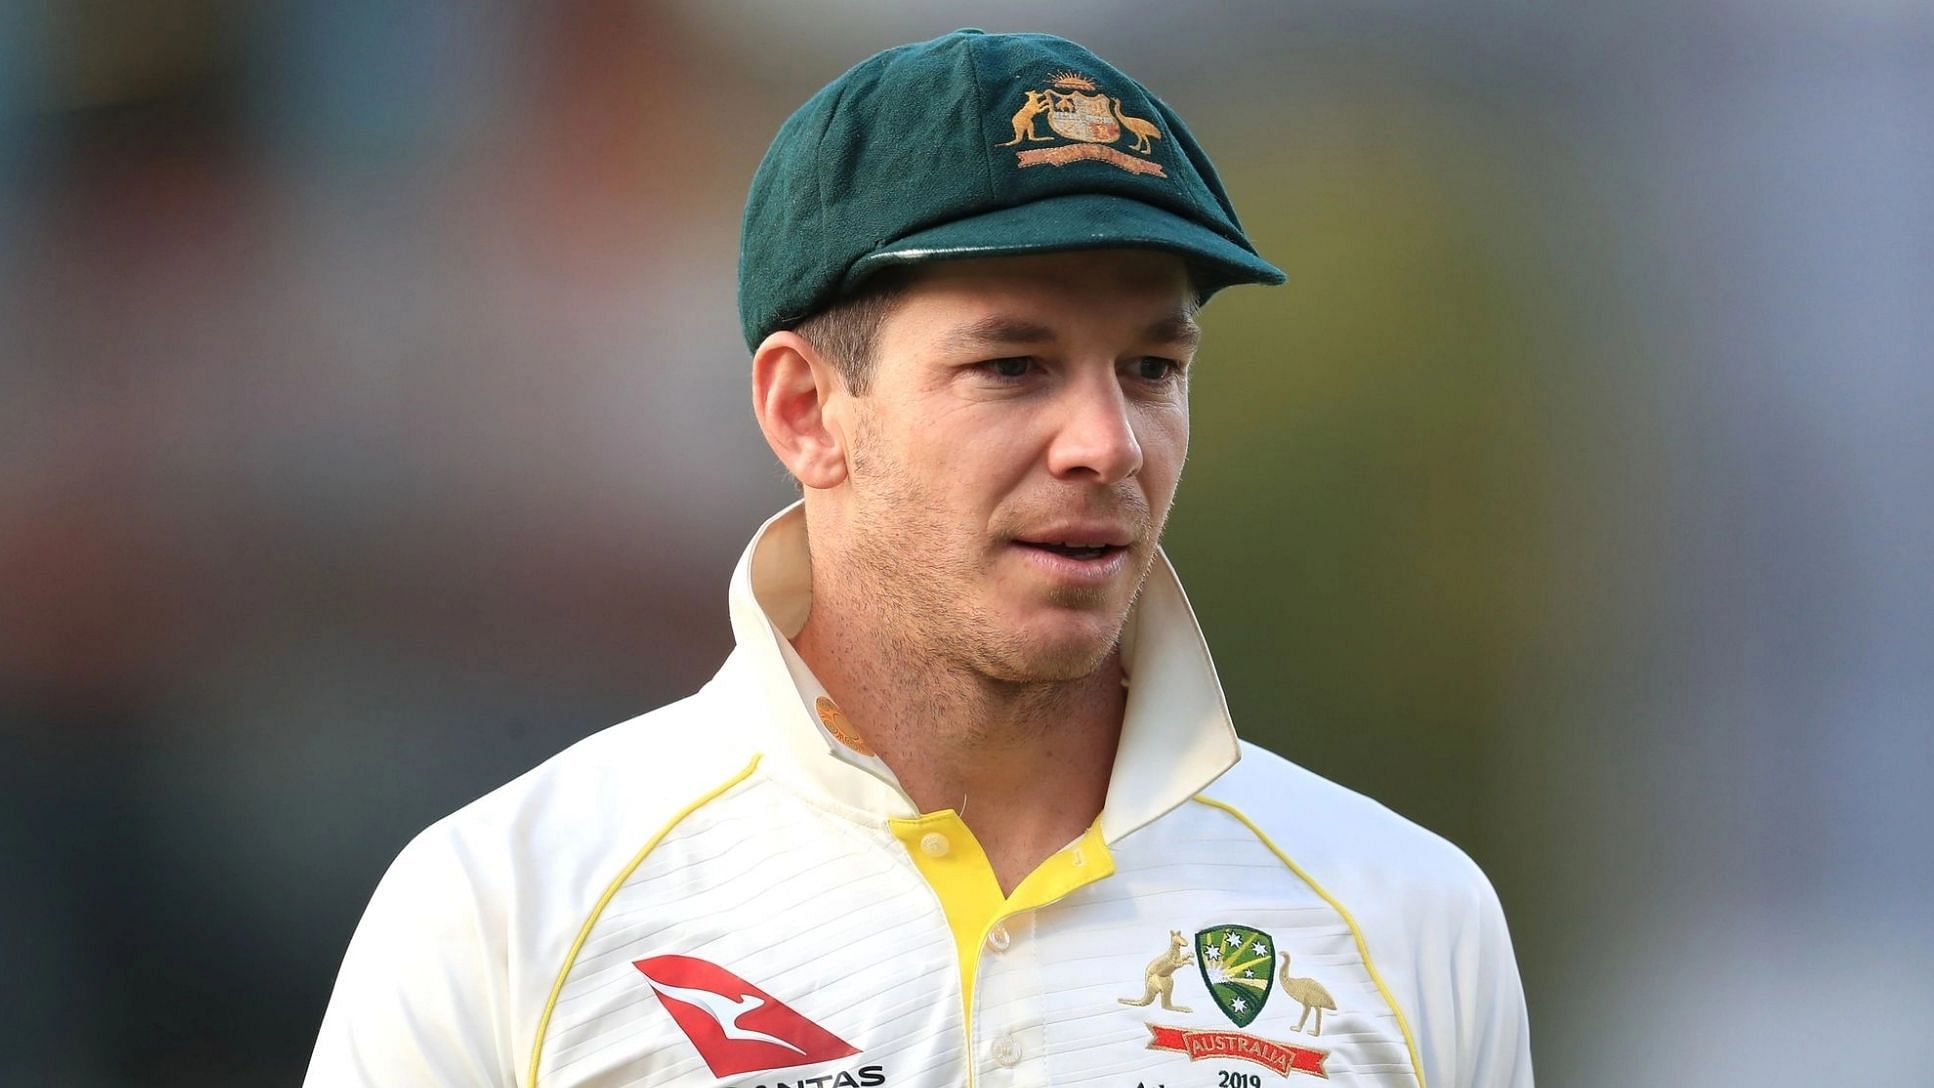 <div class="paragraphs"><p>Australian cricketer, Tim Paine found himself in hot waters after an inappropriate conversation between him and a woman came to light.</p></div>